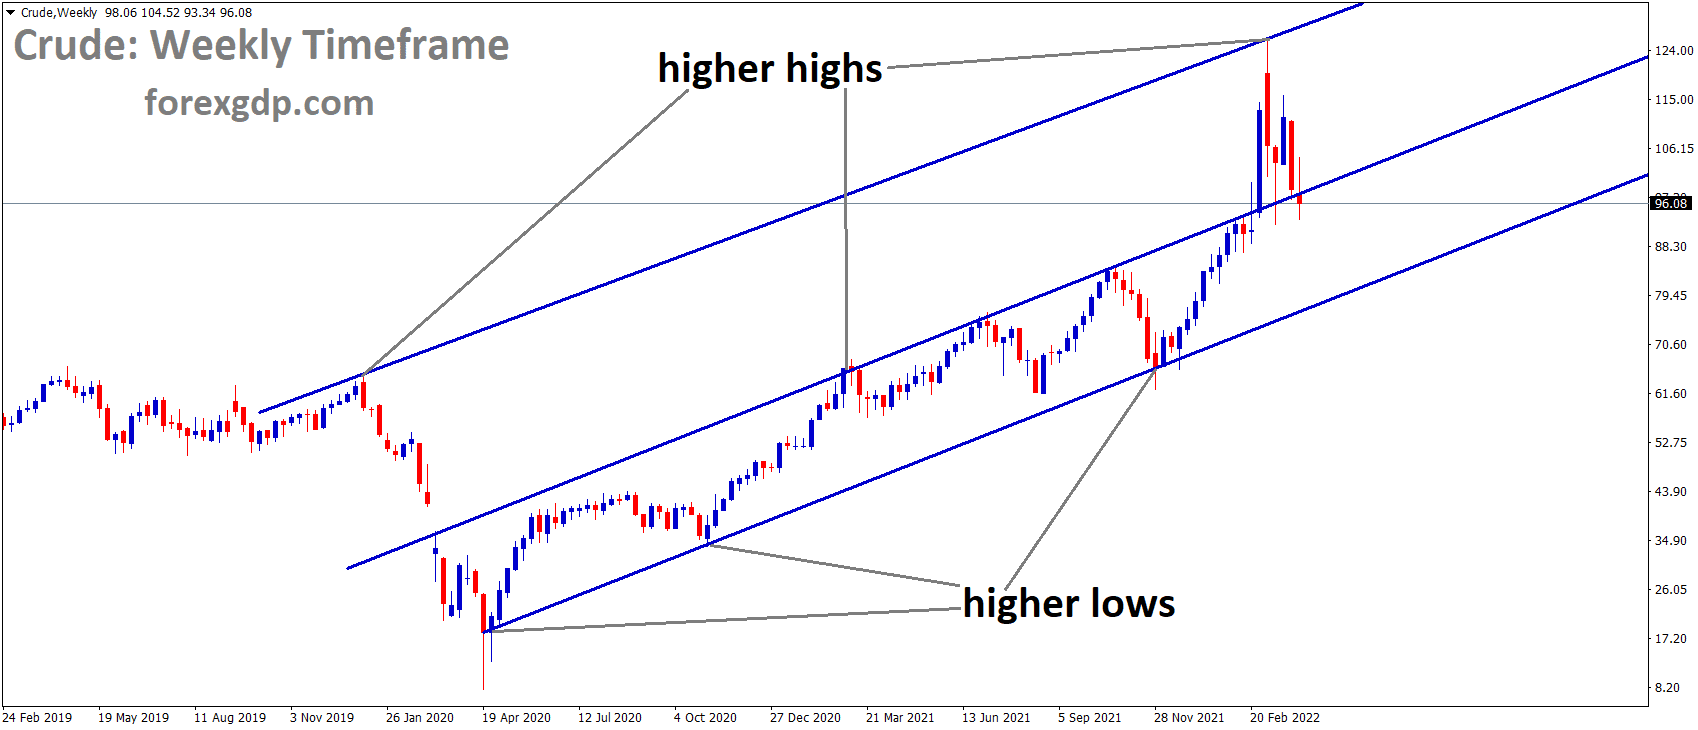 Crude Weekly Time Frame Analysis Market is moving in an Ascending Channel and the market has reached the higher low area of the middle Ascending line.